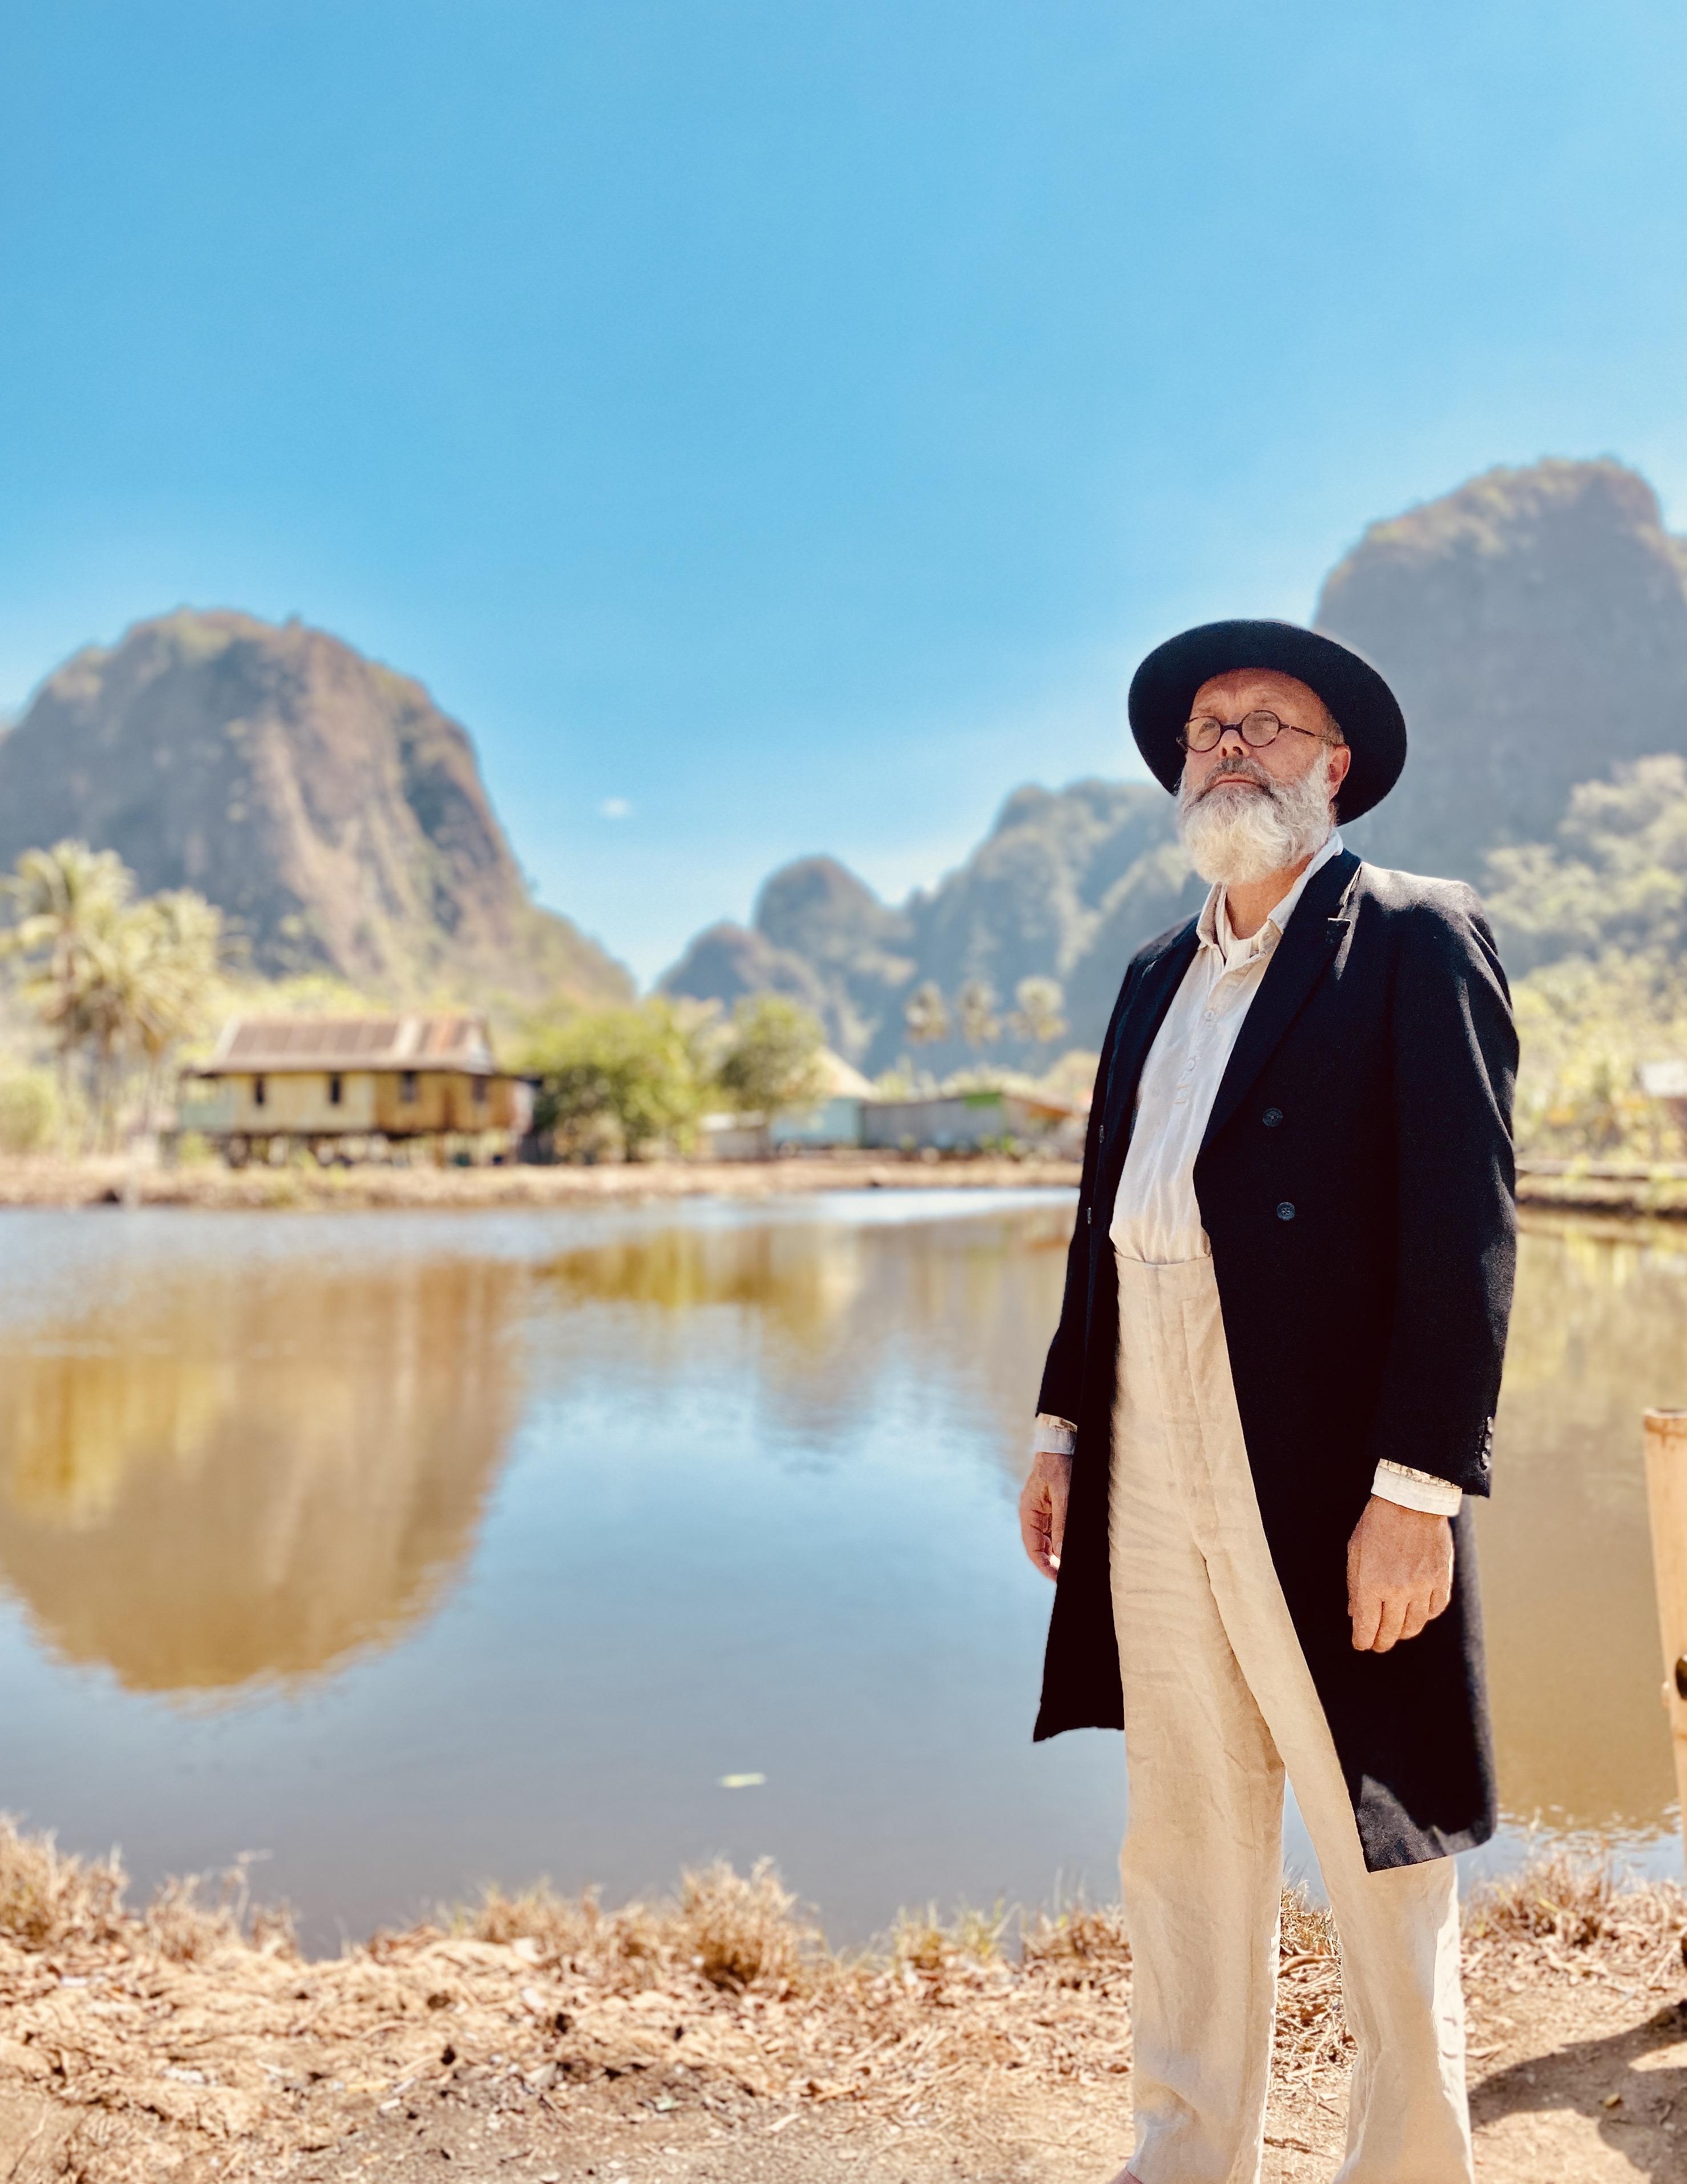 Actor Ioan Hefin dressed as Wallace by a lake in Indonesia